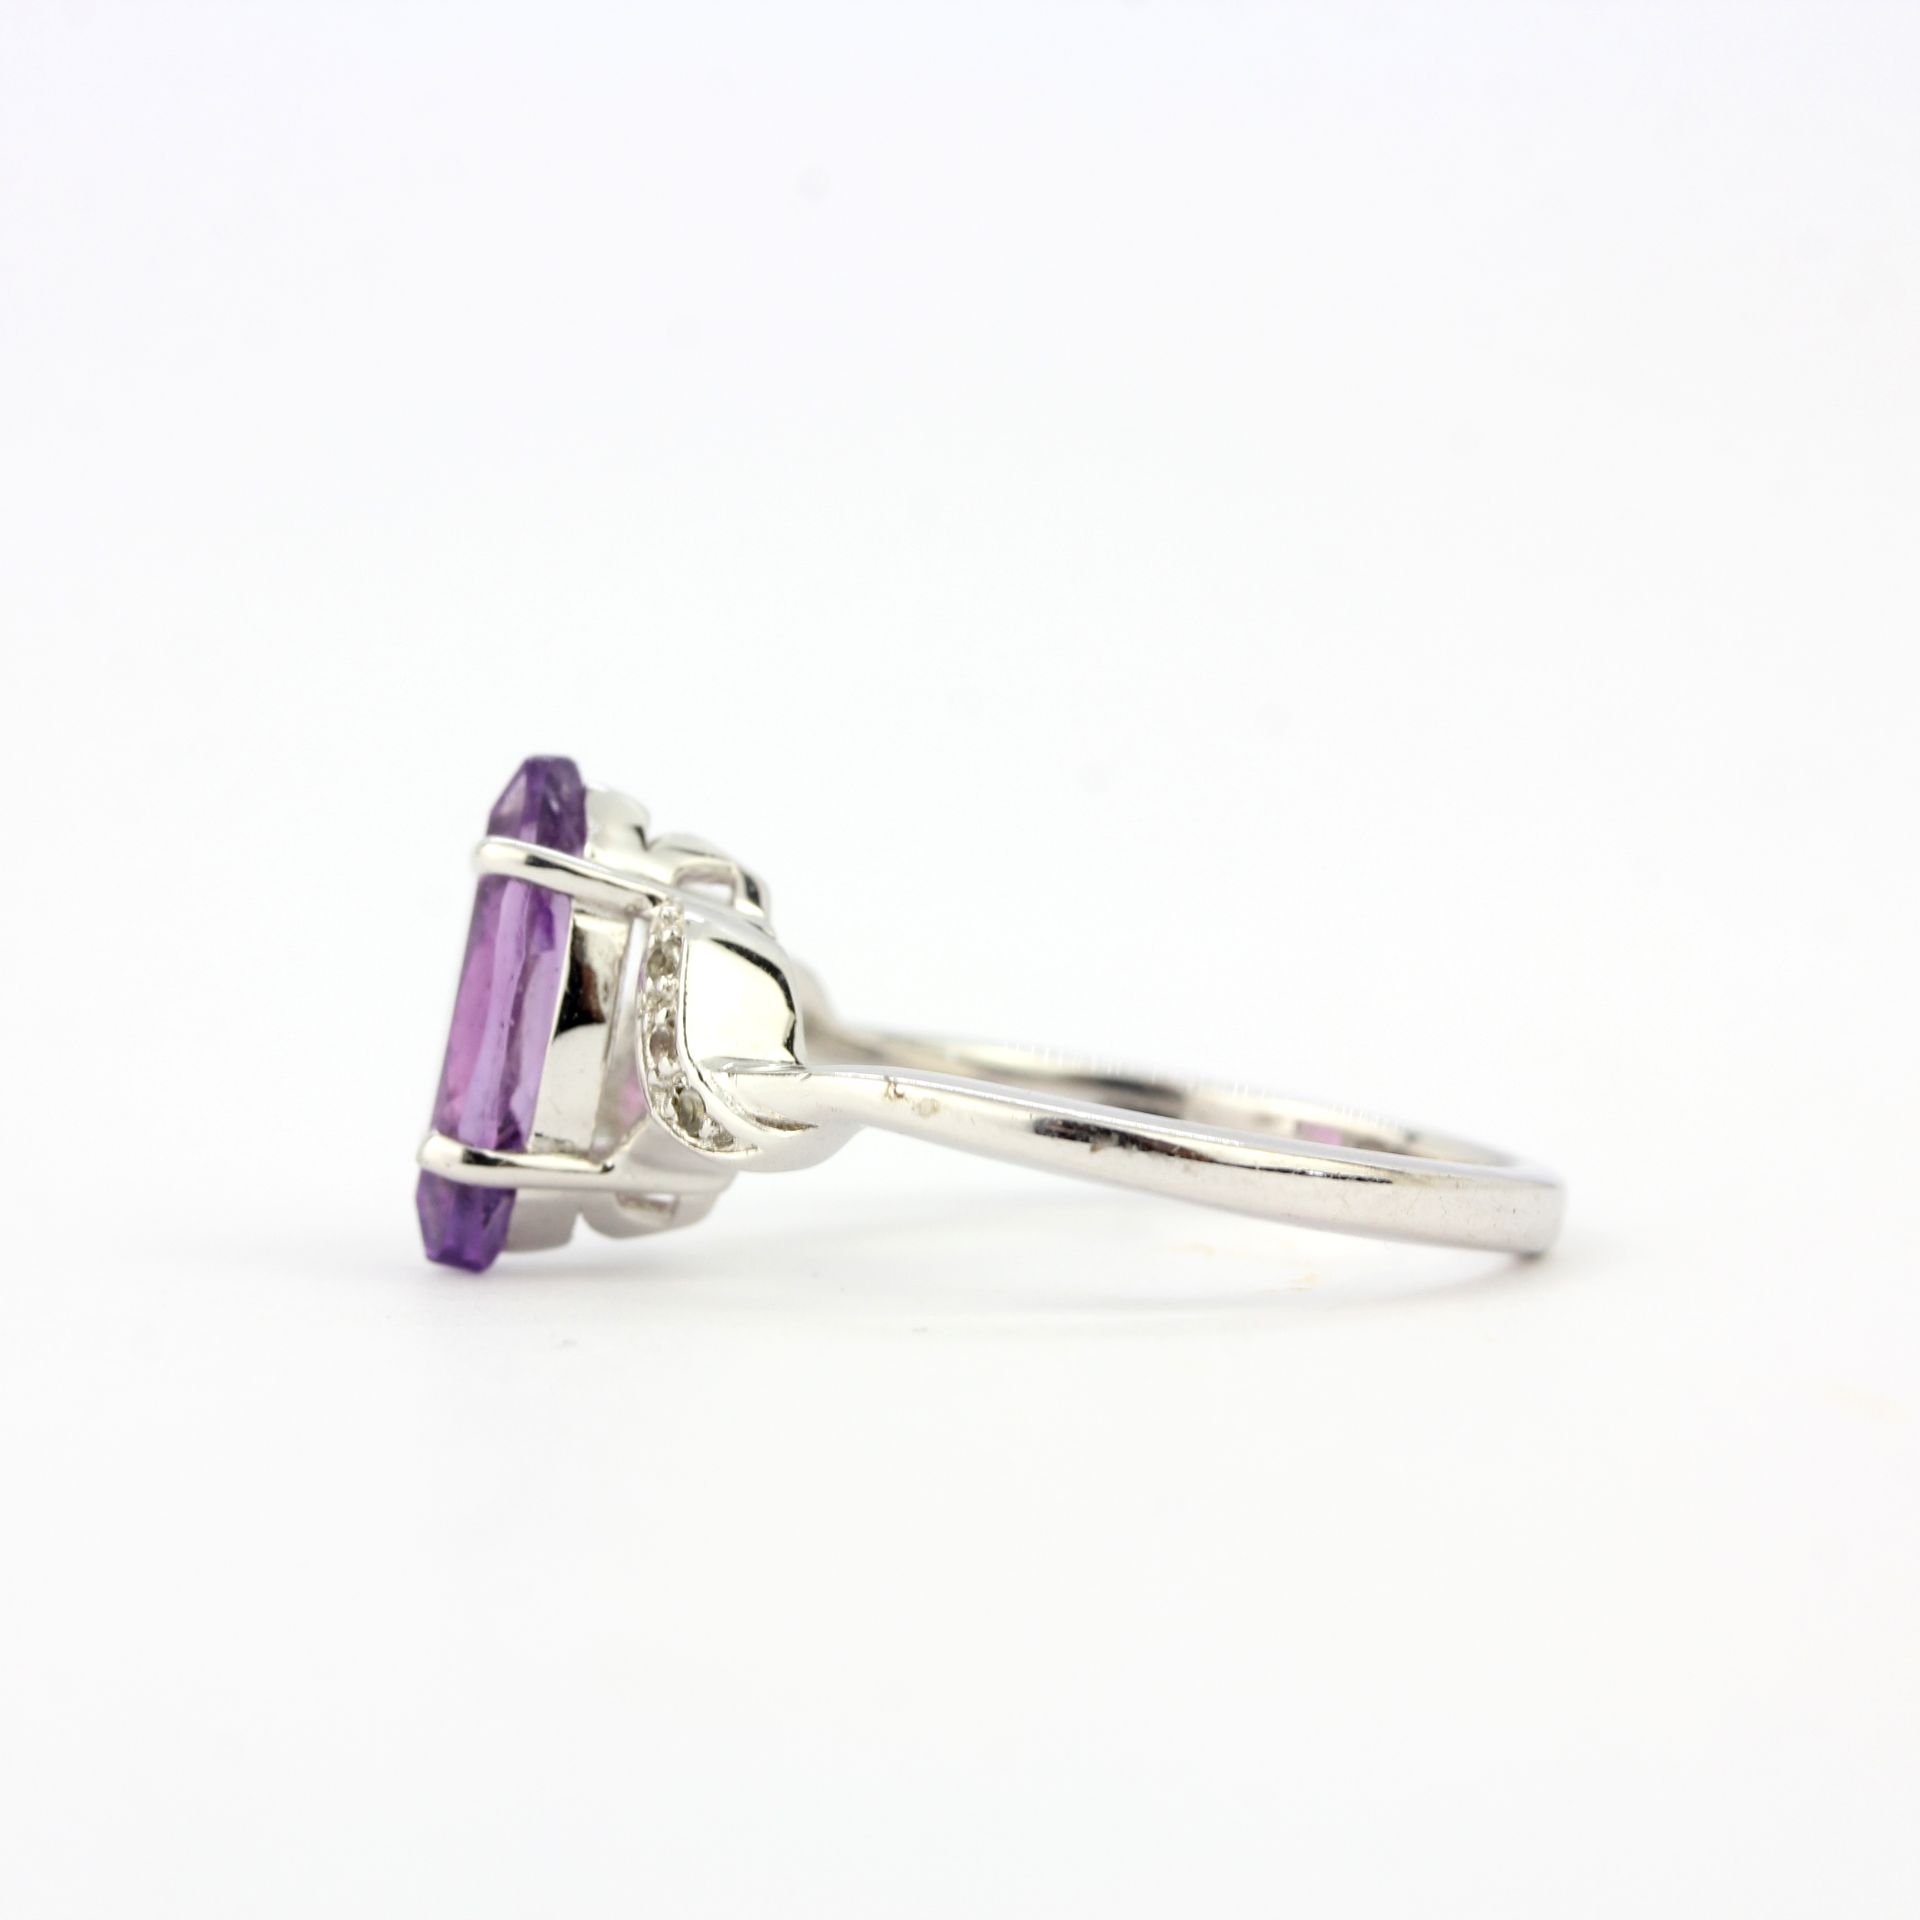 A 9ct white gold ring set with a marquise cut amethyst and diamonds, ring size N.5. - Image 2 of 3